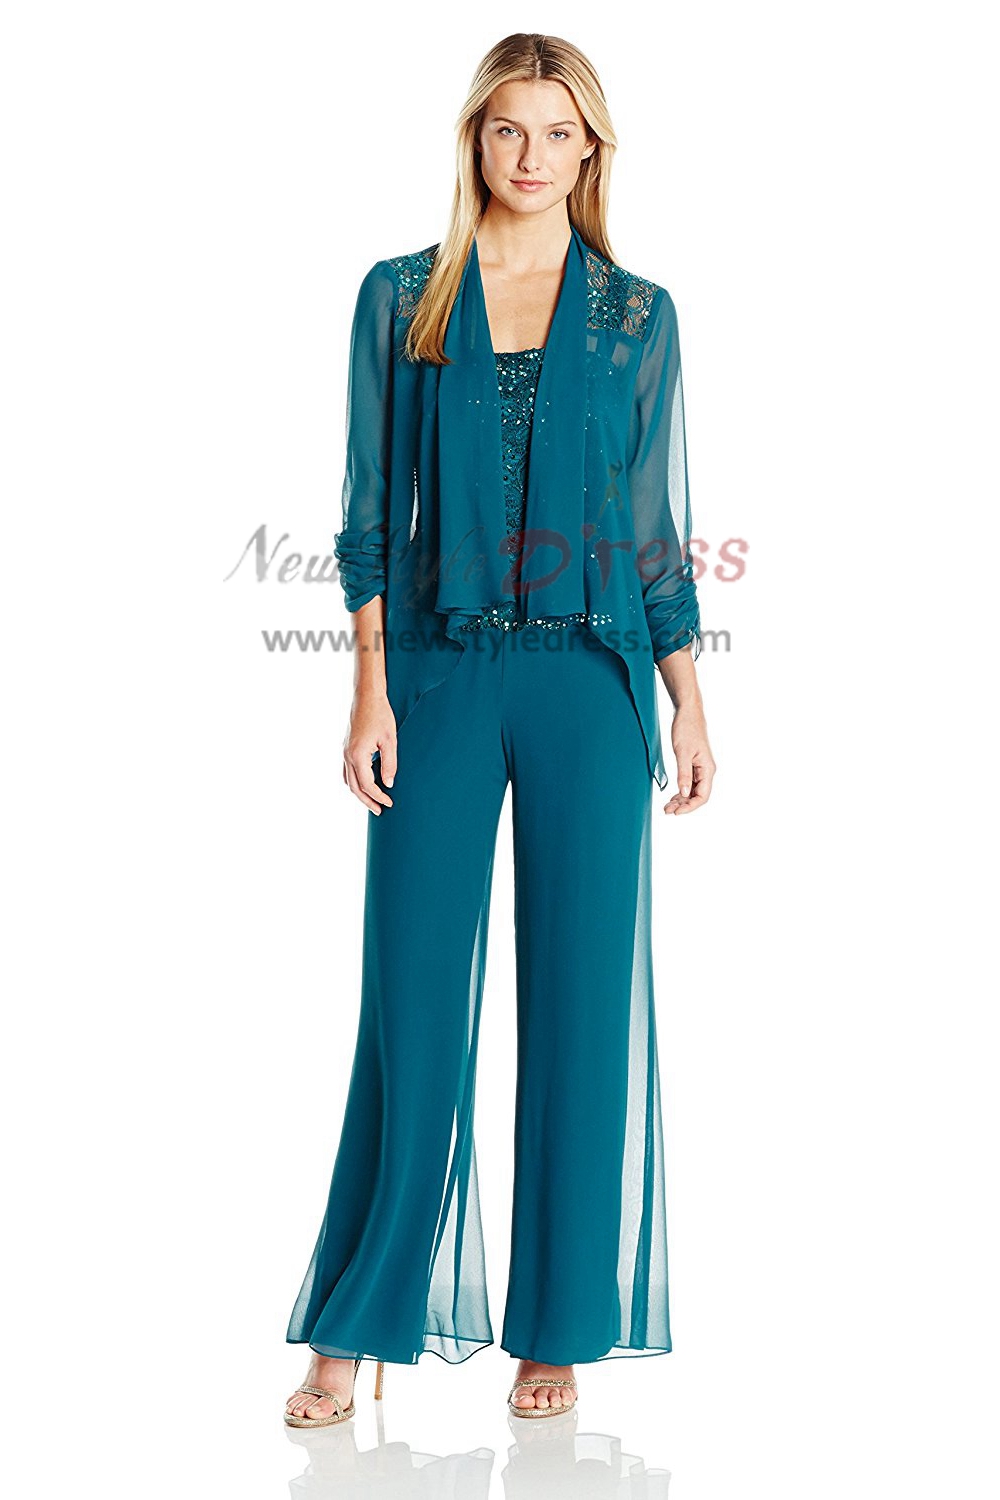 Greenblack Hunter Mother of the bride pant suits Chiffon Three piece ...